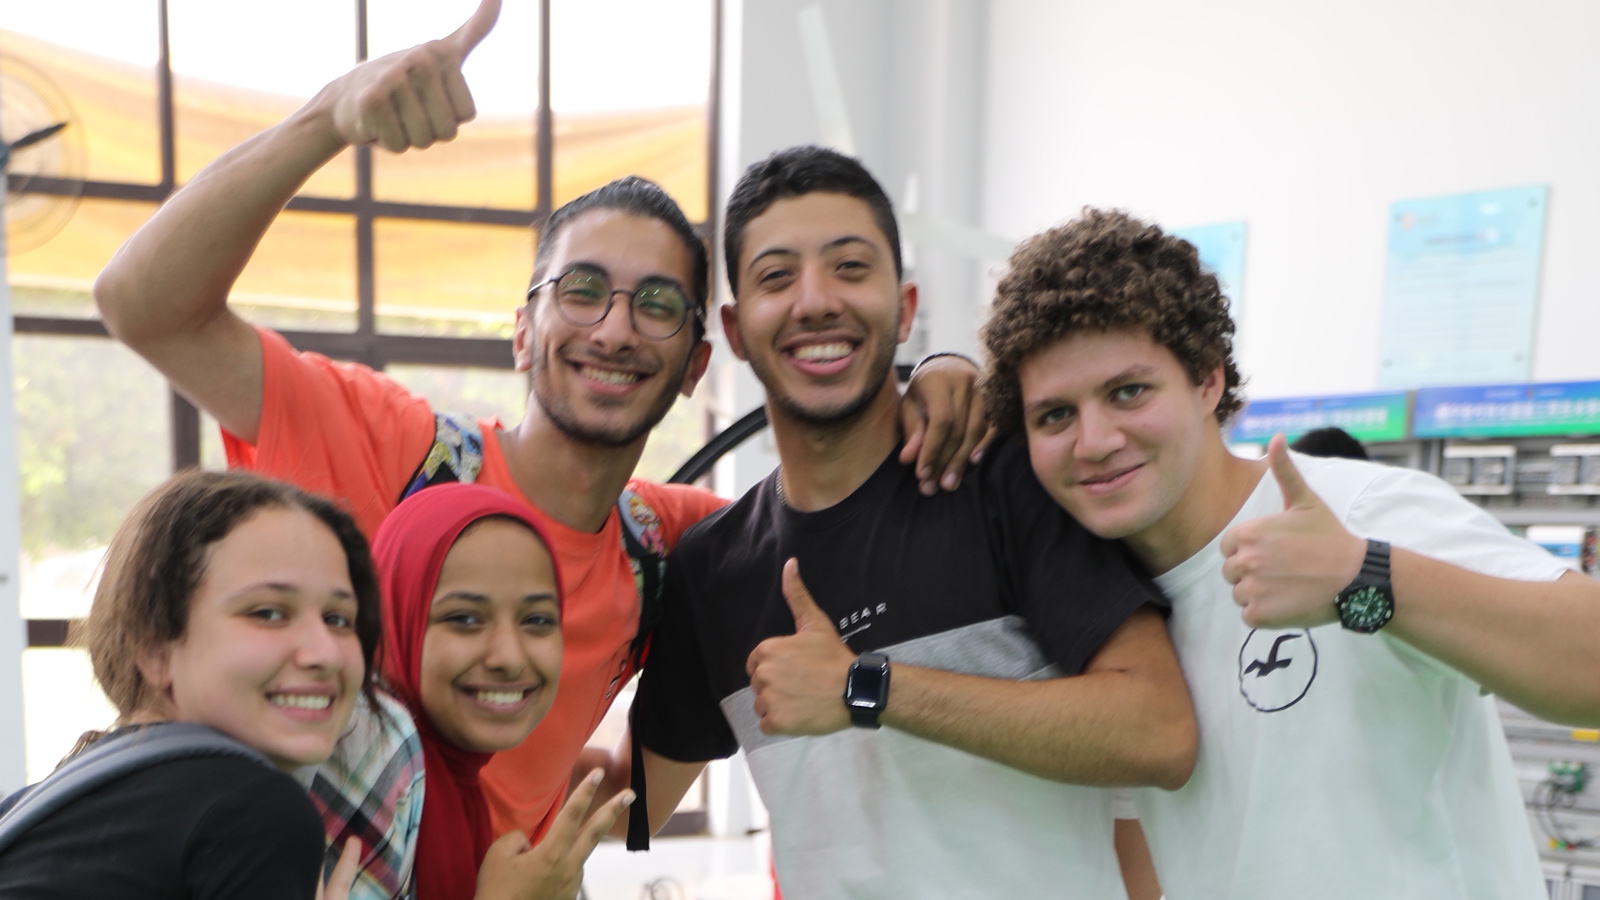 university students smiling with thumbs up